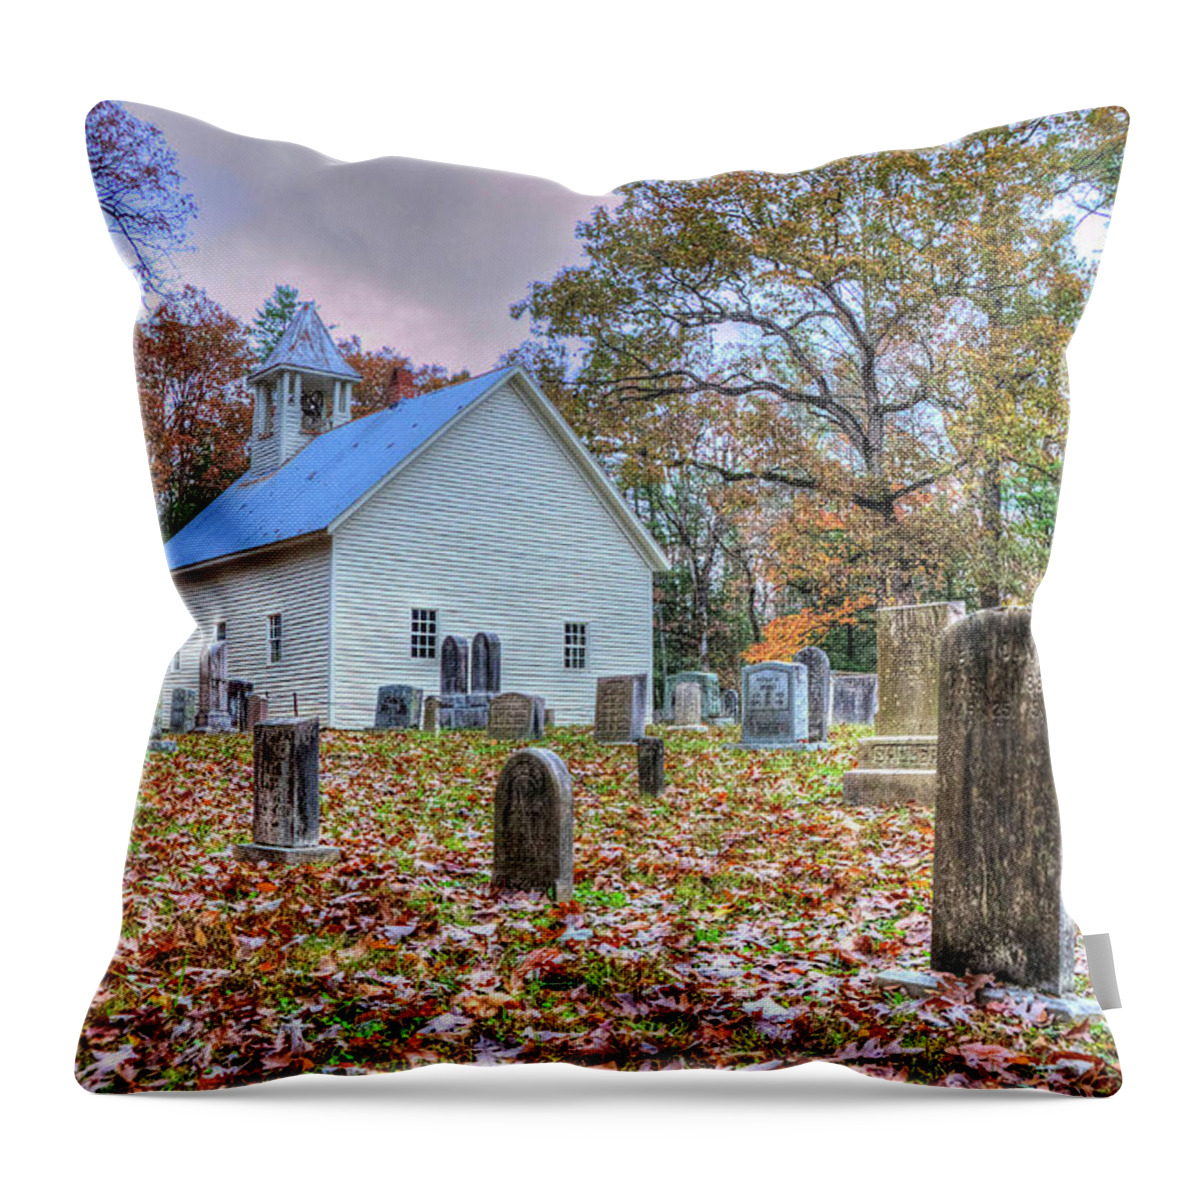 Cades Cove Throw Pillow featuring the photograph Gathered With The Saints by Randall Dill